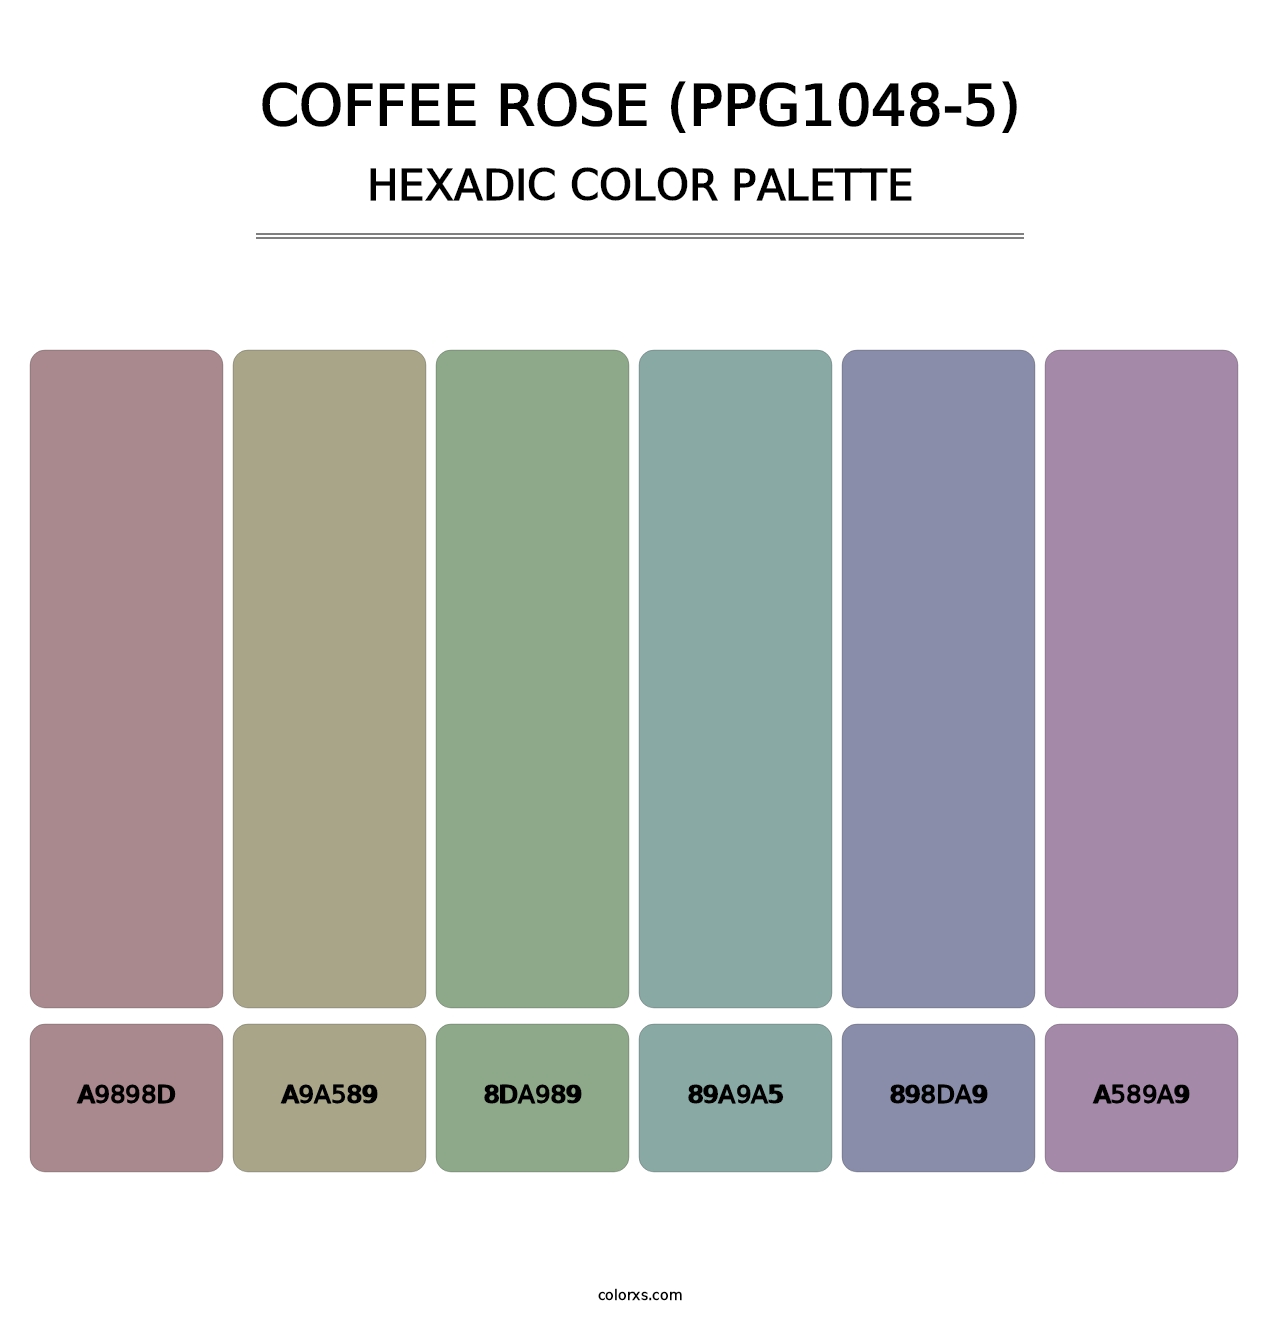 Coffee Rose (PPG1048-5) - Hexadic Color Palette